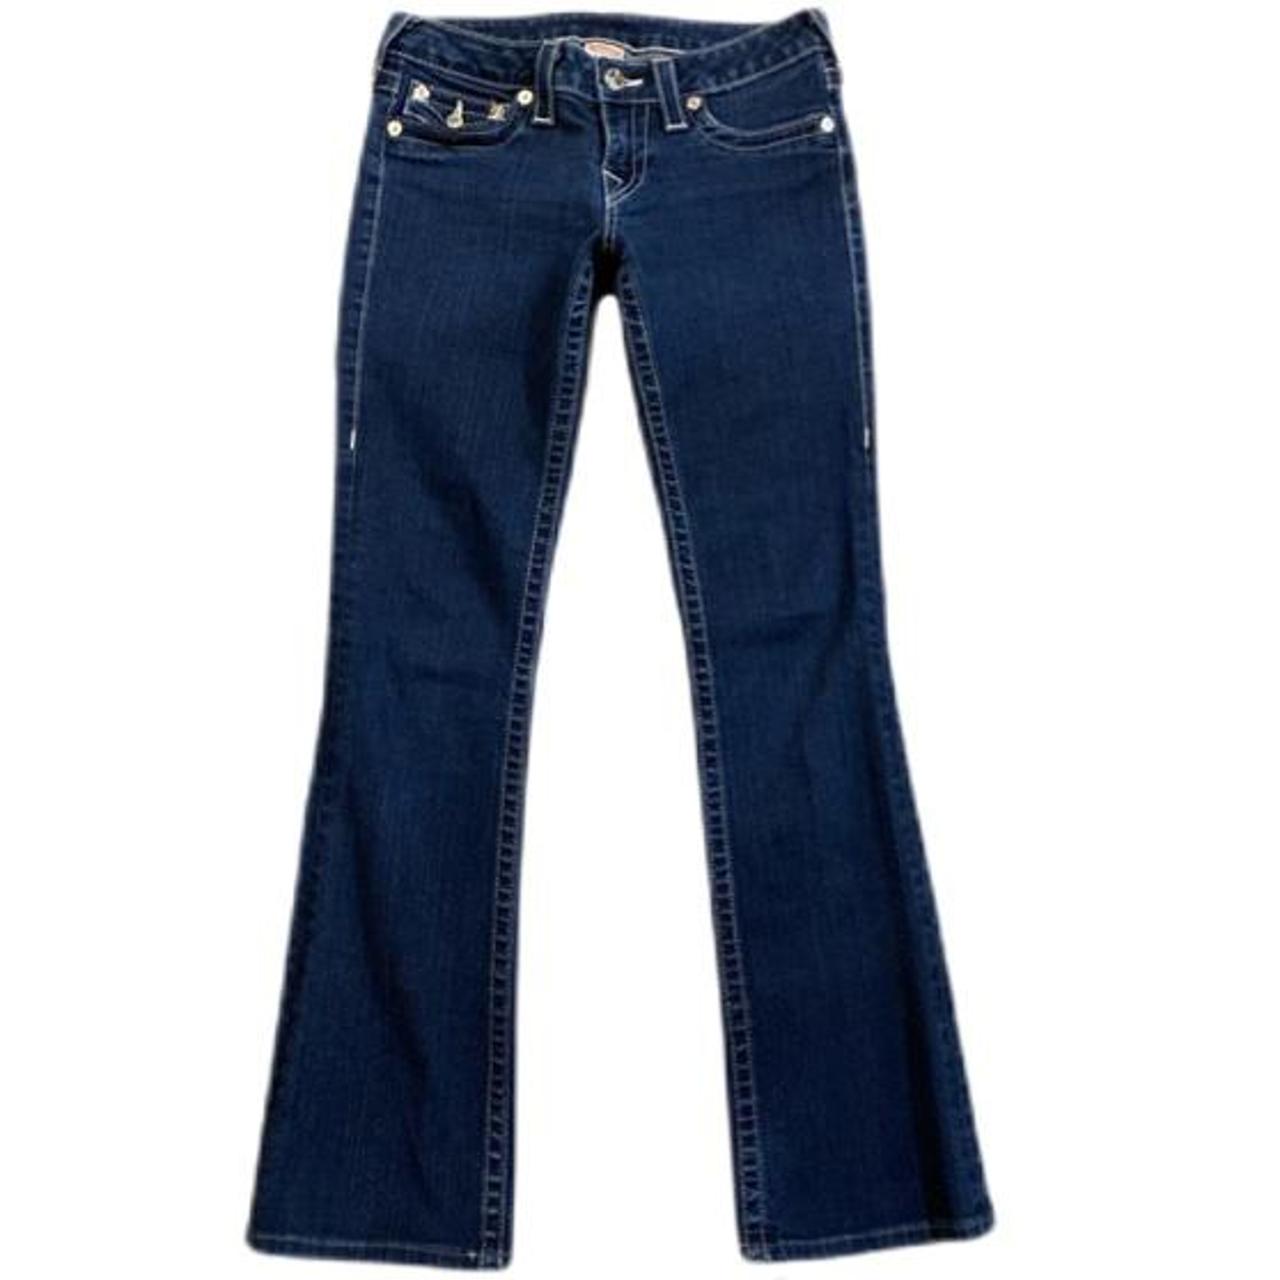 Product Image 2 - True religion. “Becky” low rise